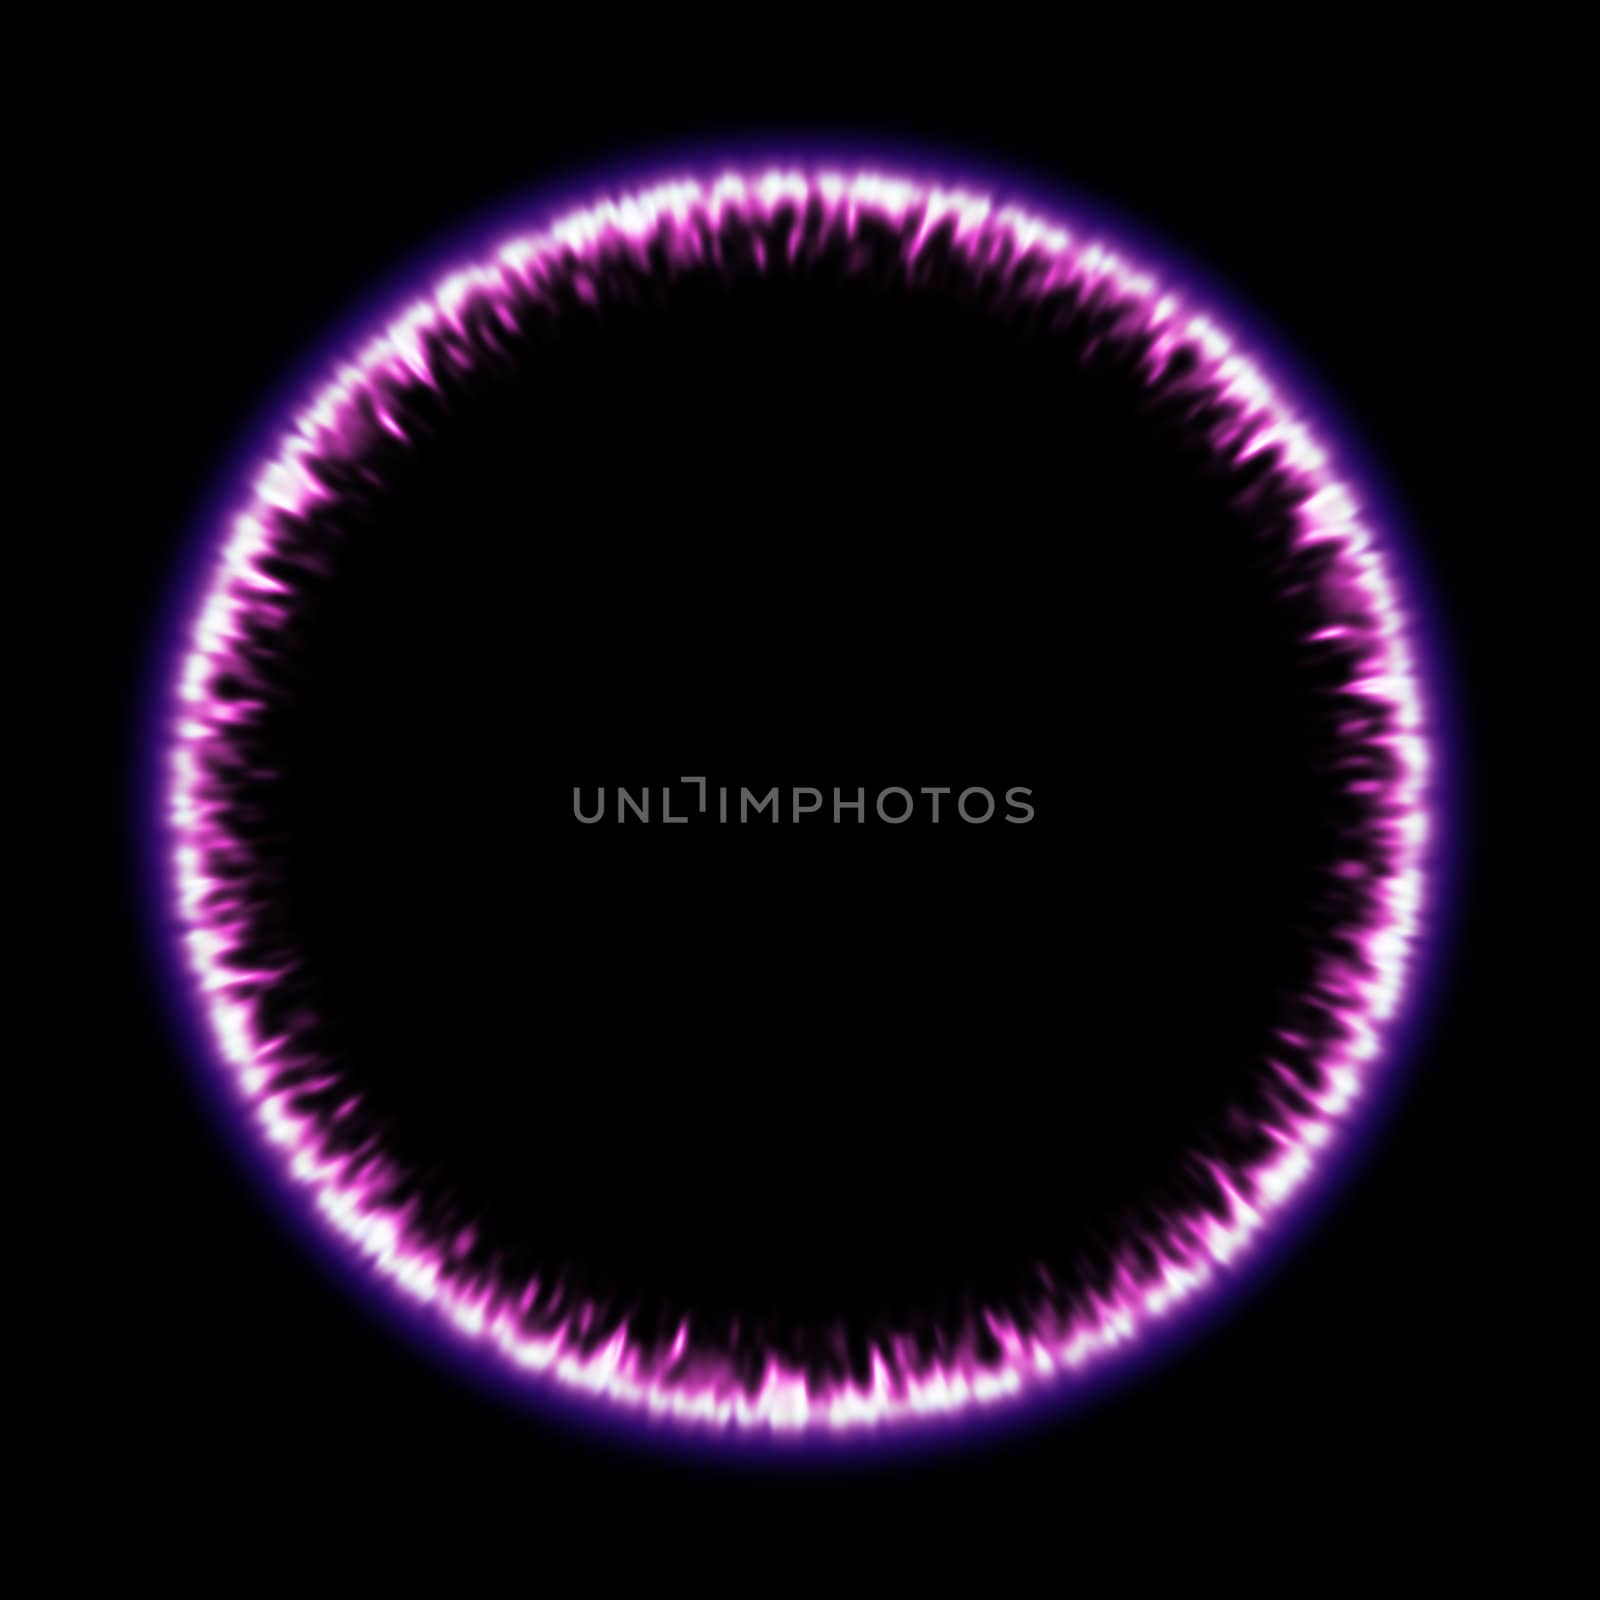 An image of a purple ring of fire